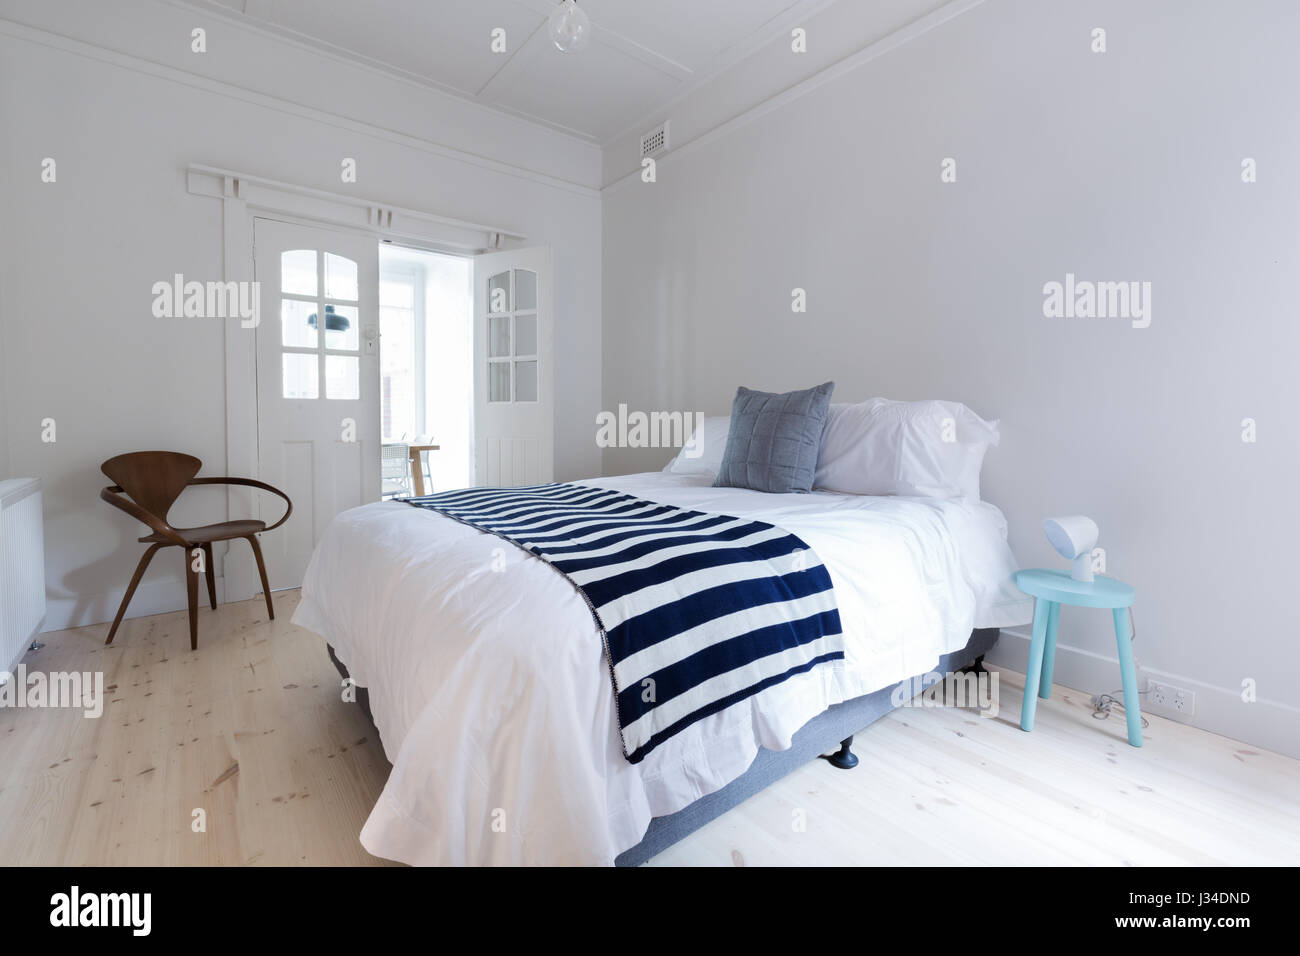 Crisp white Danish stylish bedroom with striped throw rug and blue side table Stock Photo